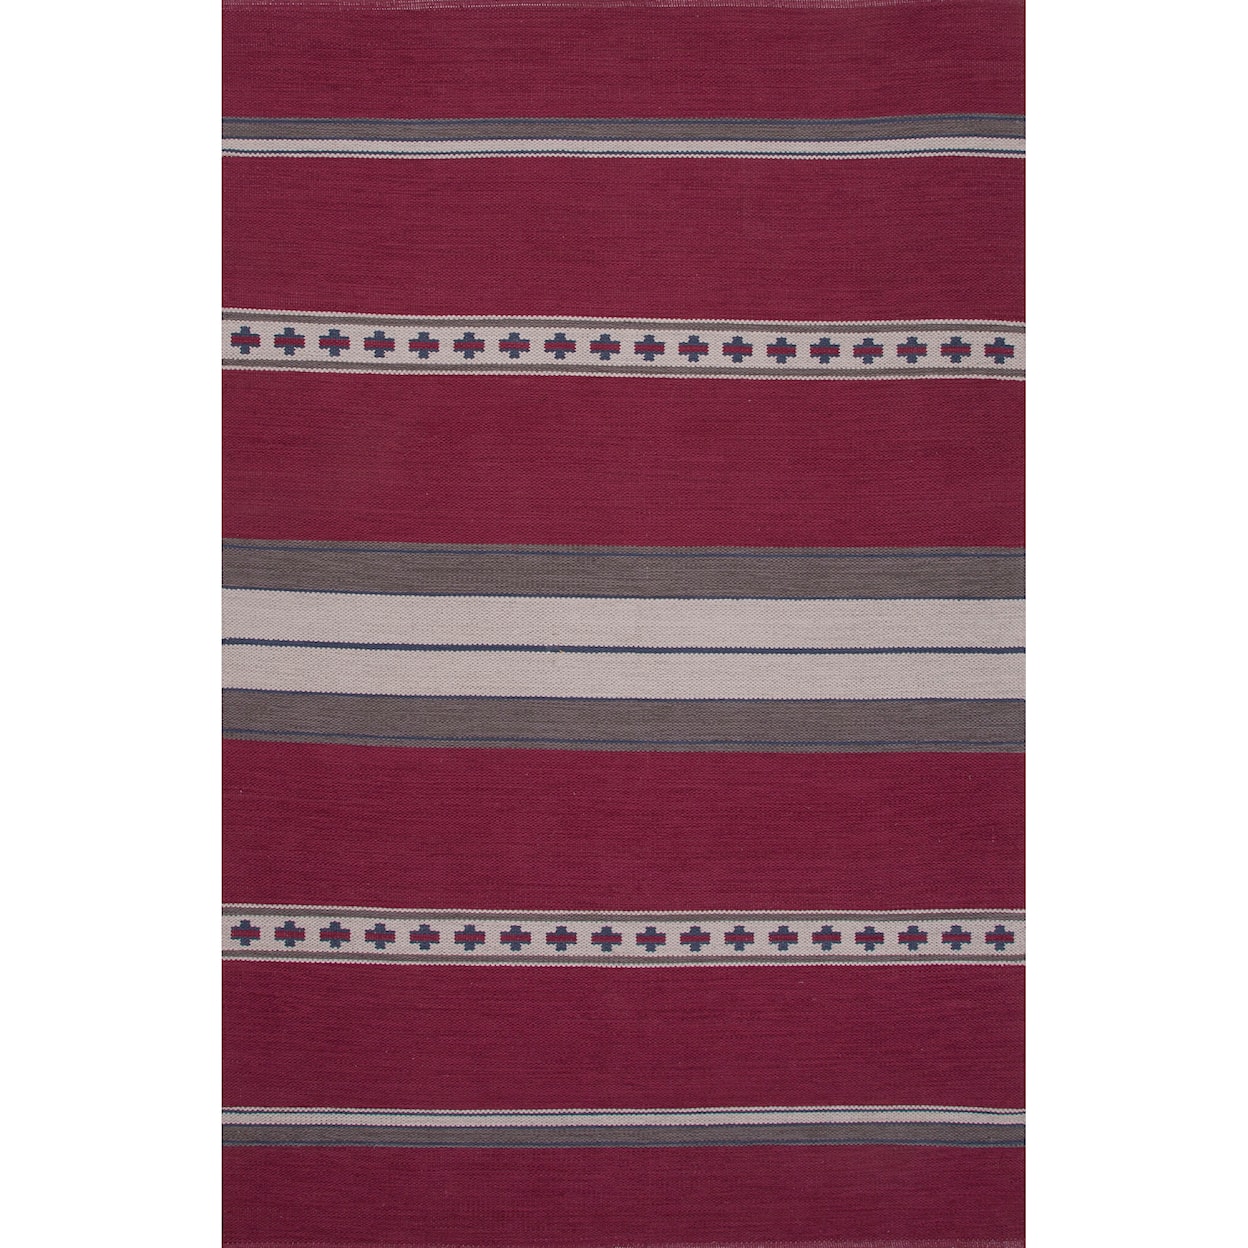 JAIPUR Living Traditions Modern Cotton Flat Weave 2 x 3 Rug